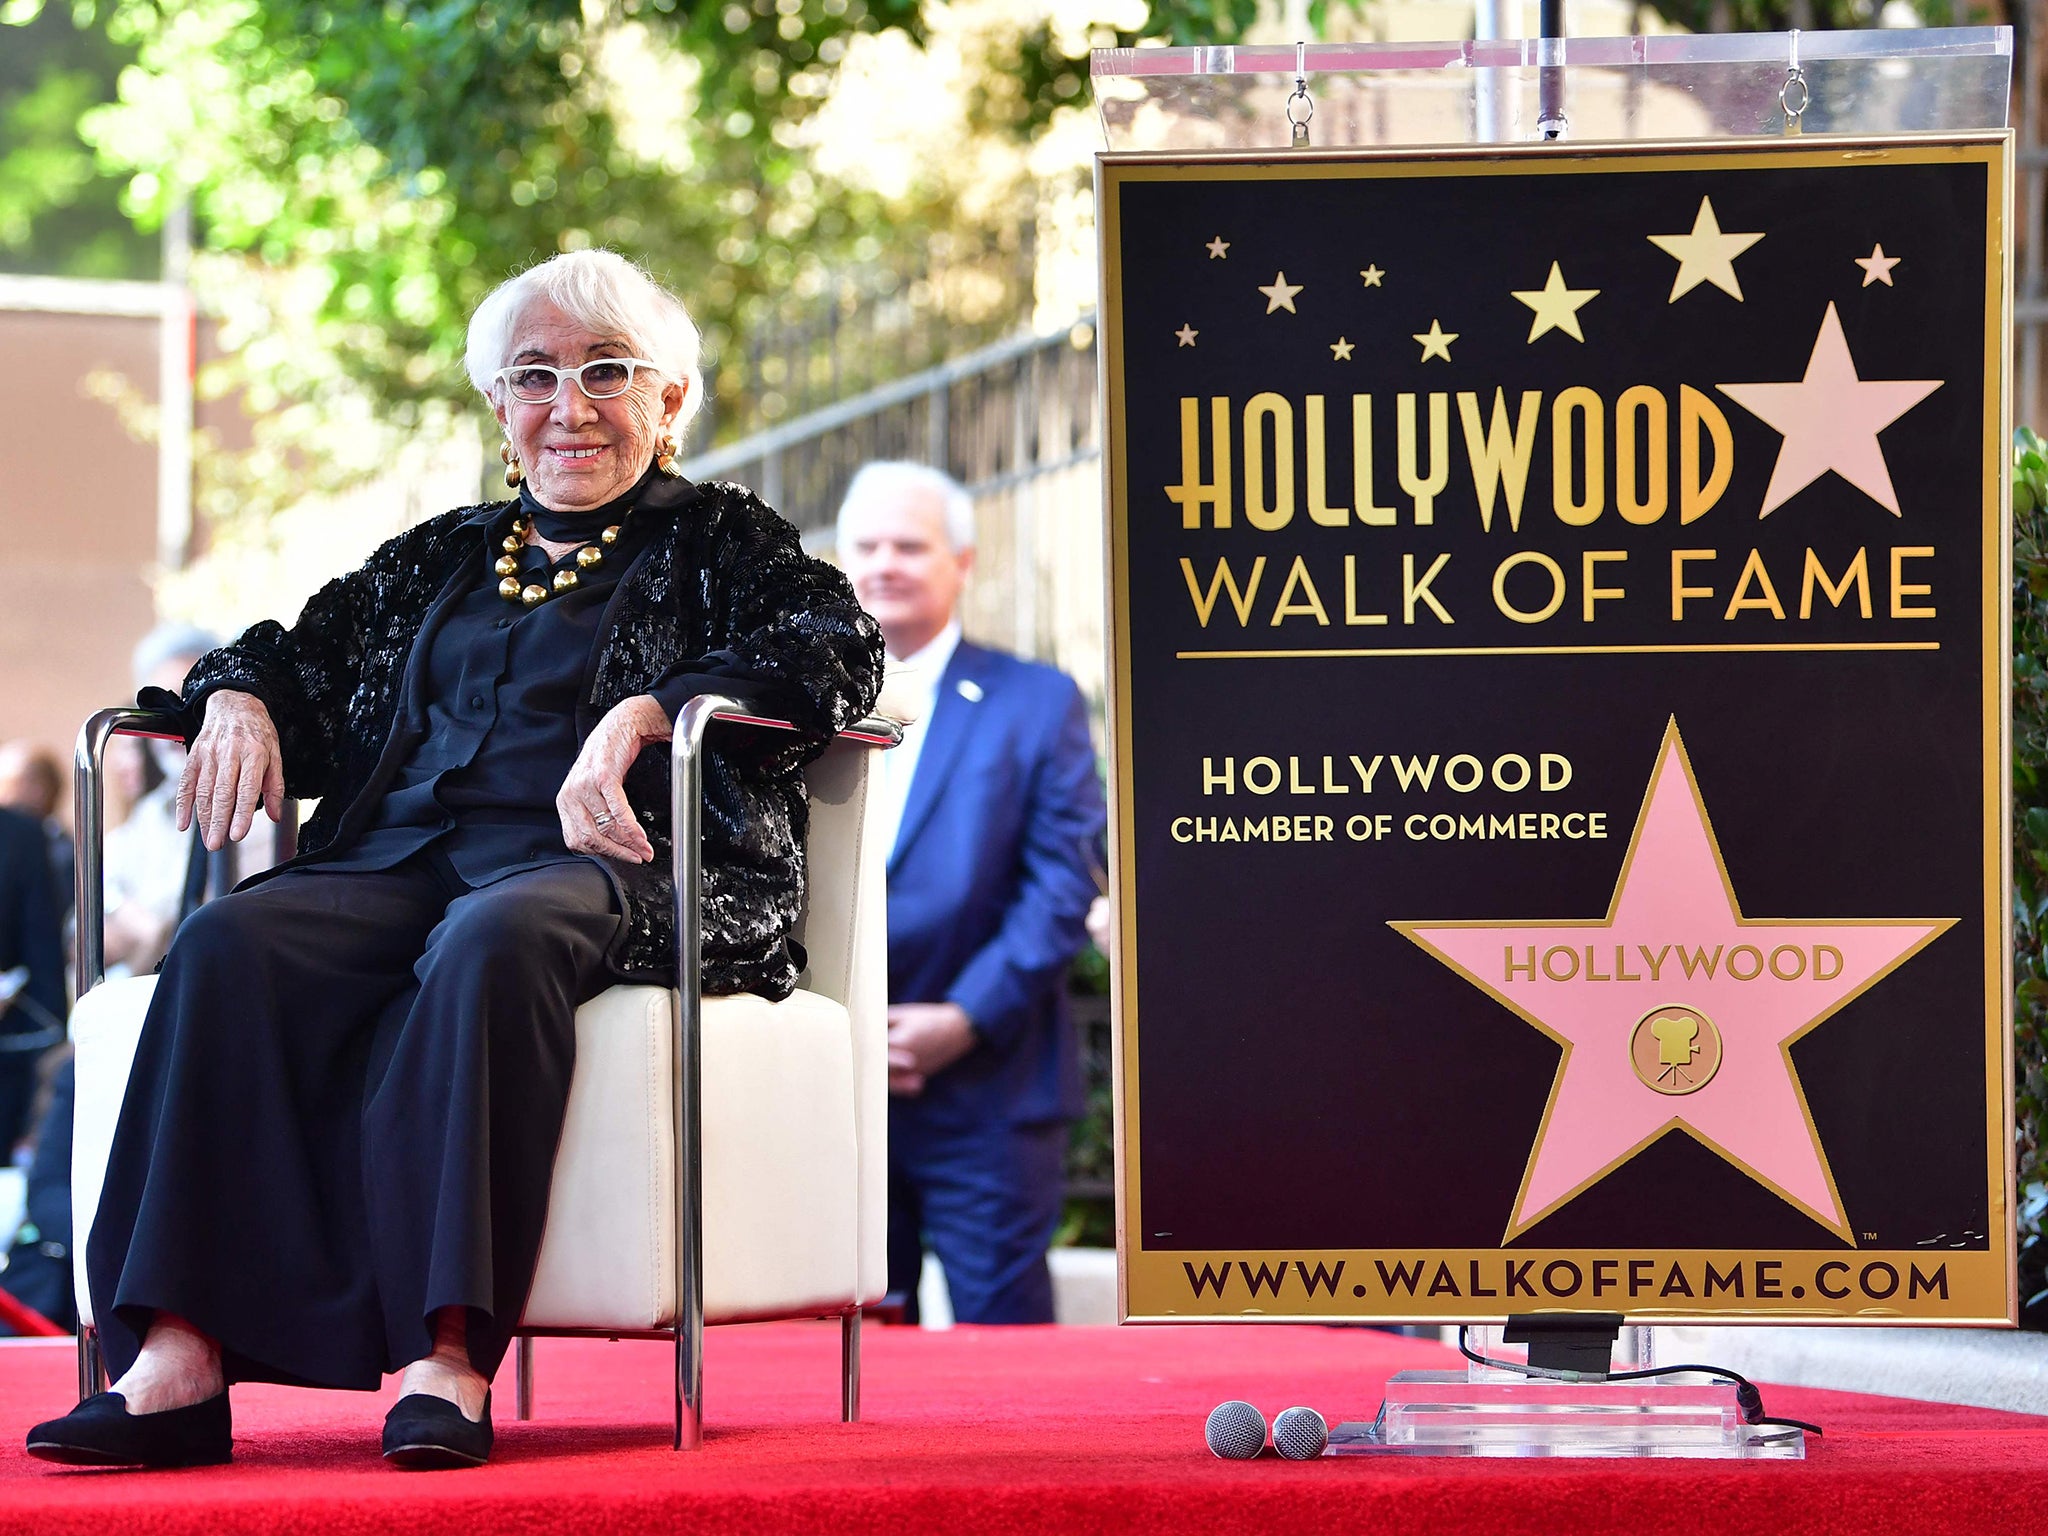 Wertmuller awaits the start of her Hollywood walk of fame star ceremony in 2019